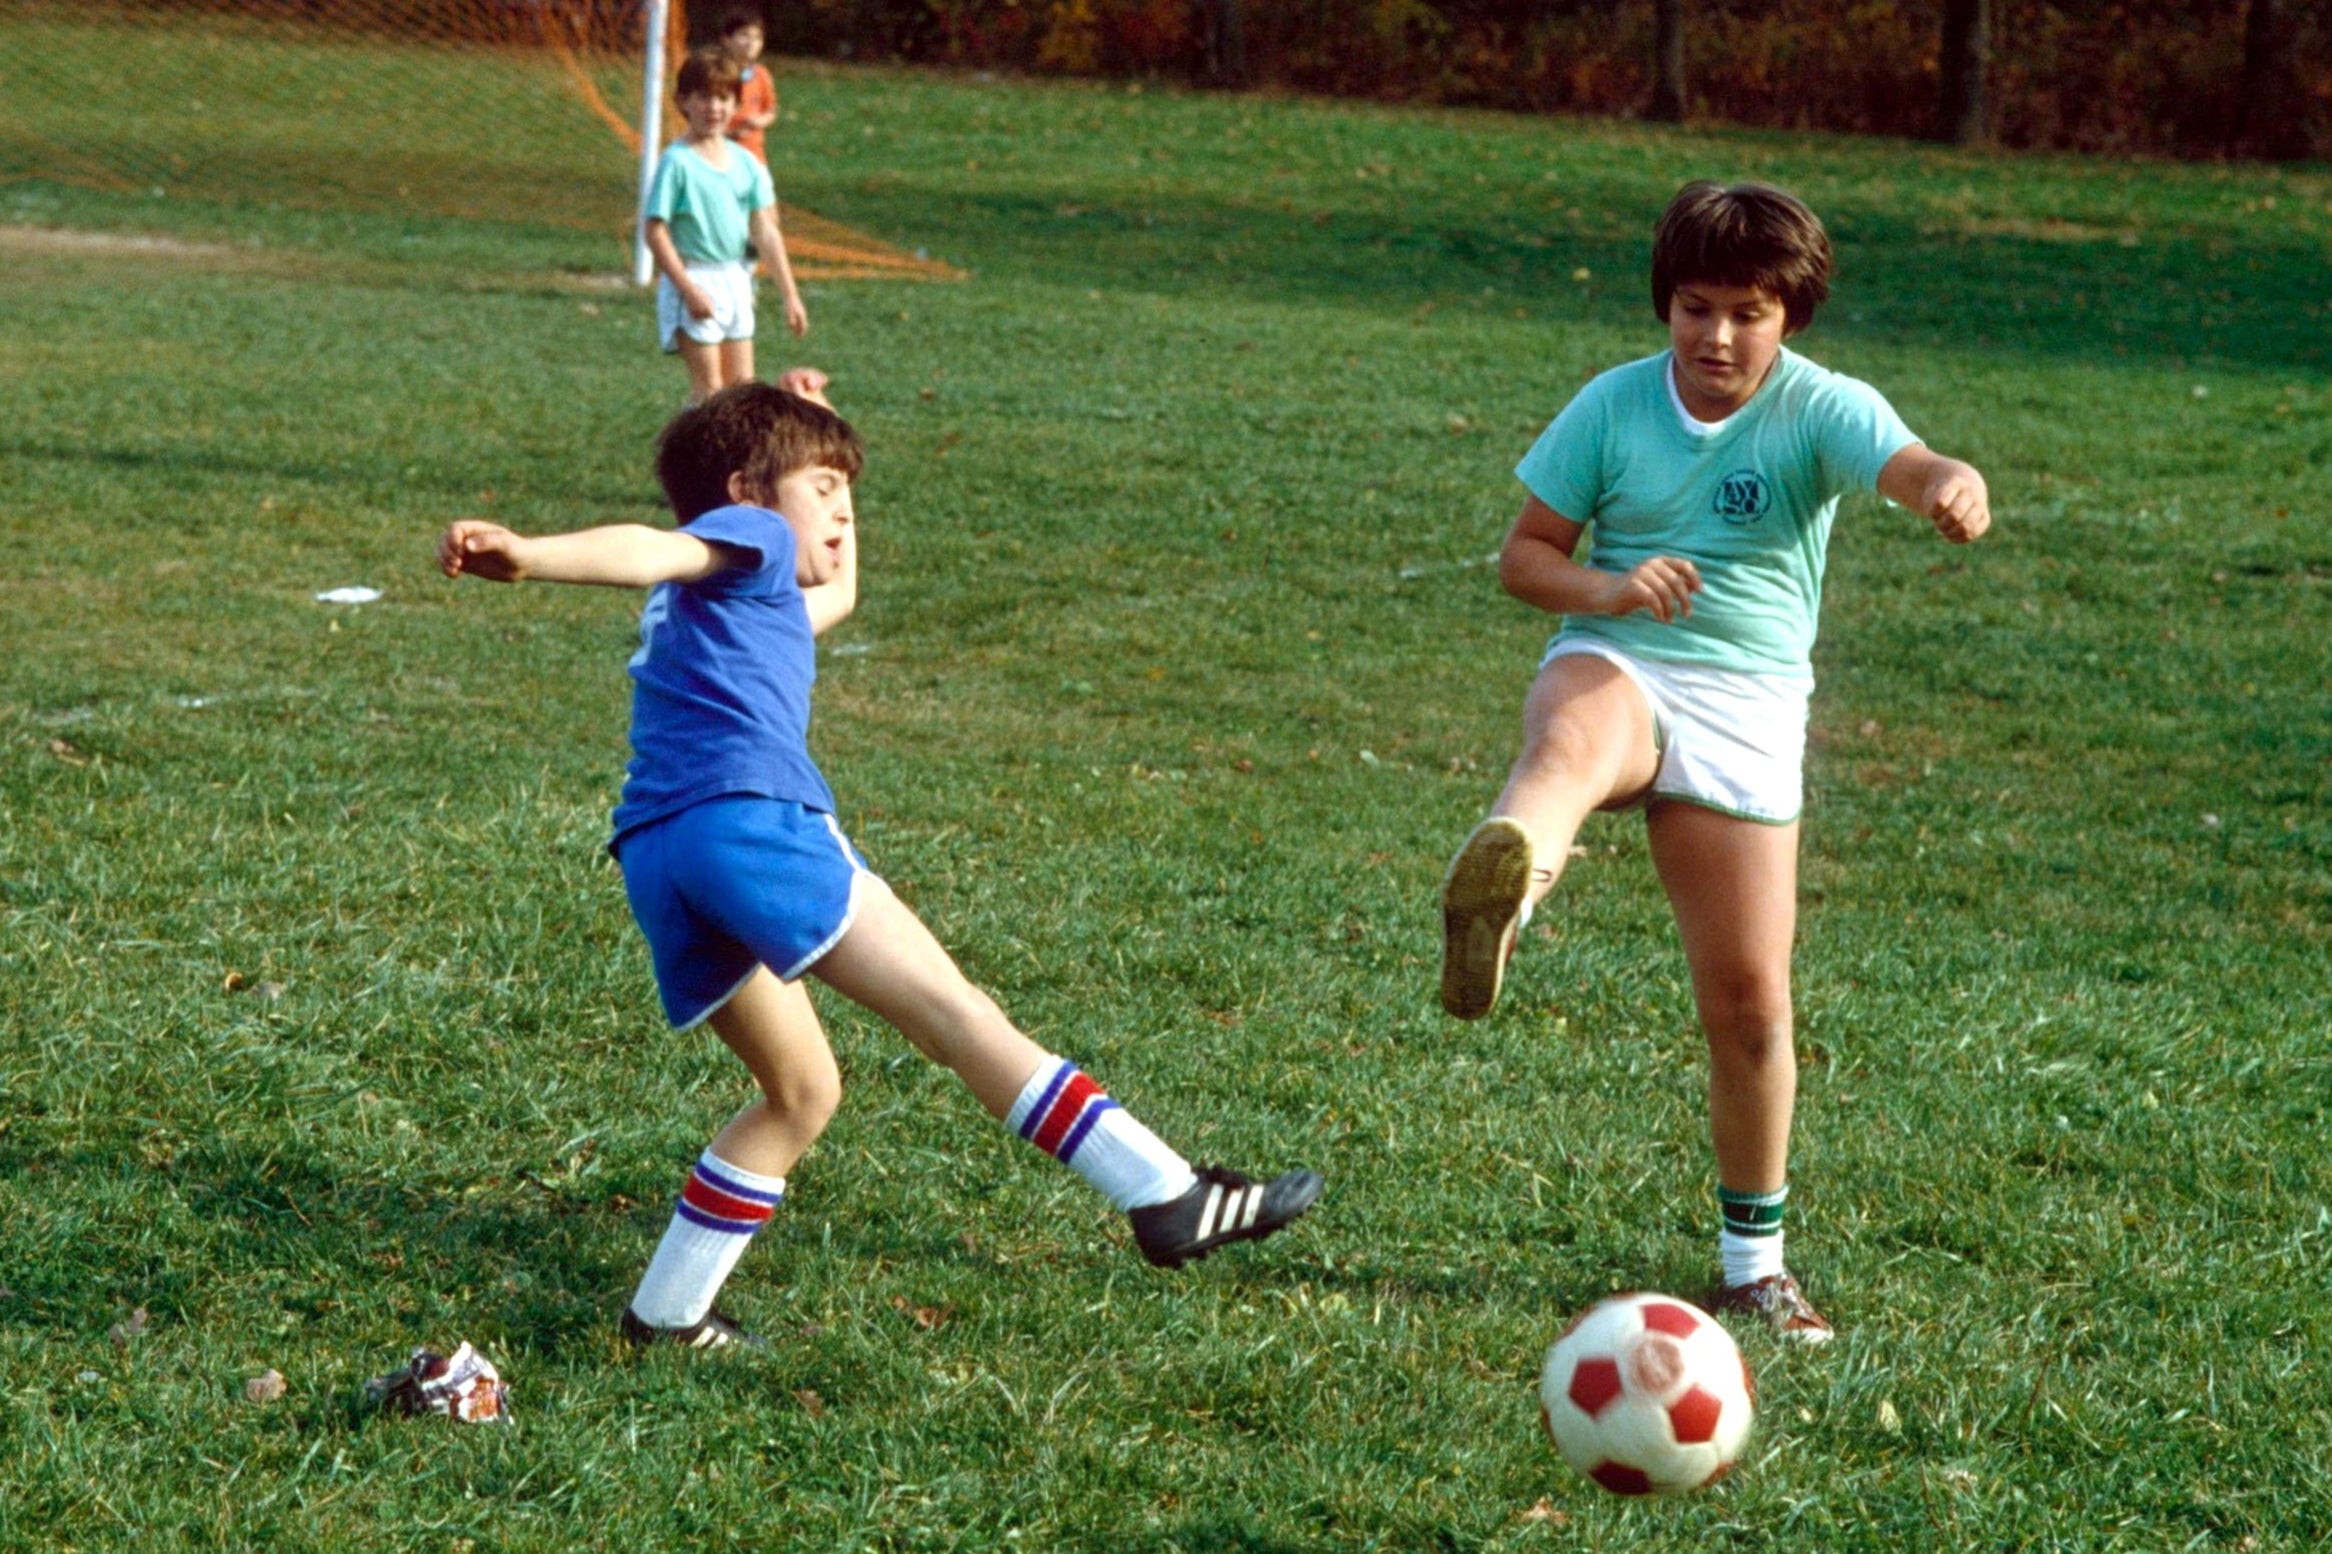 Glory days: Children play football together in the halycon days of 1983